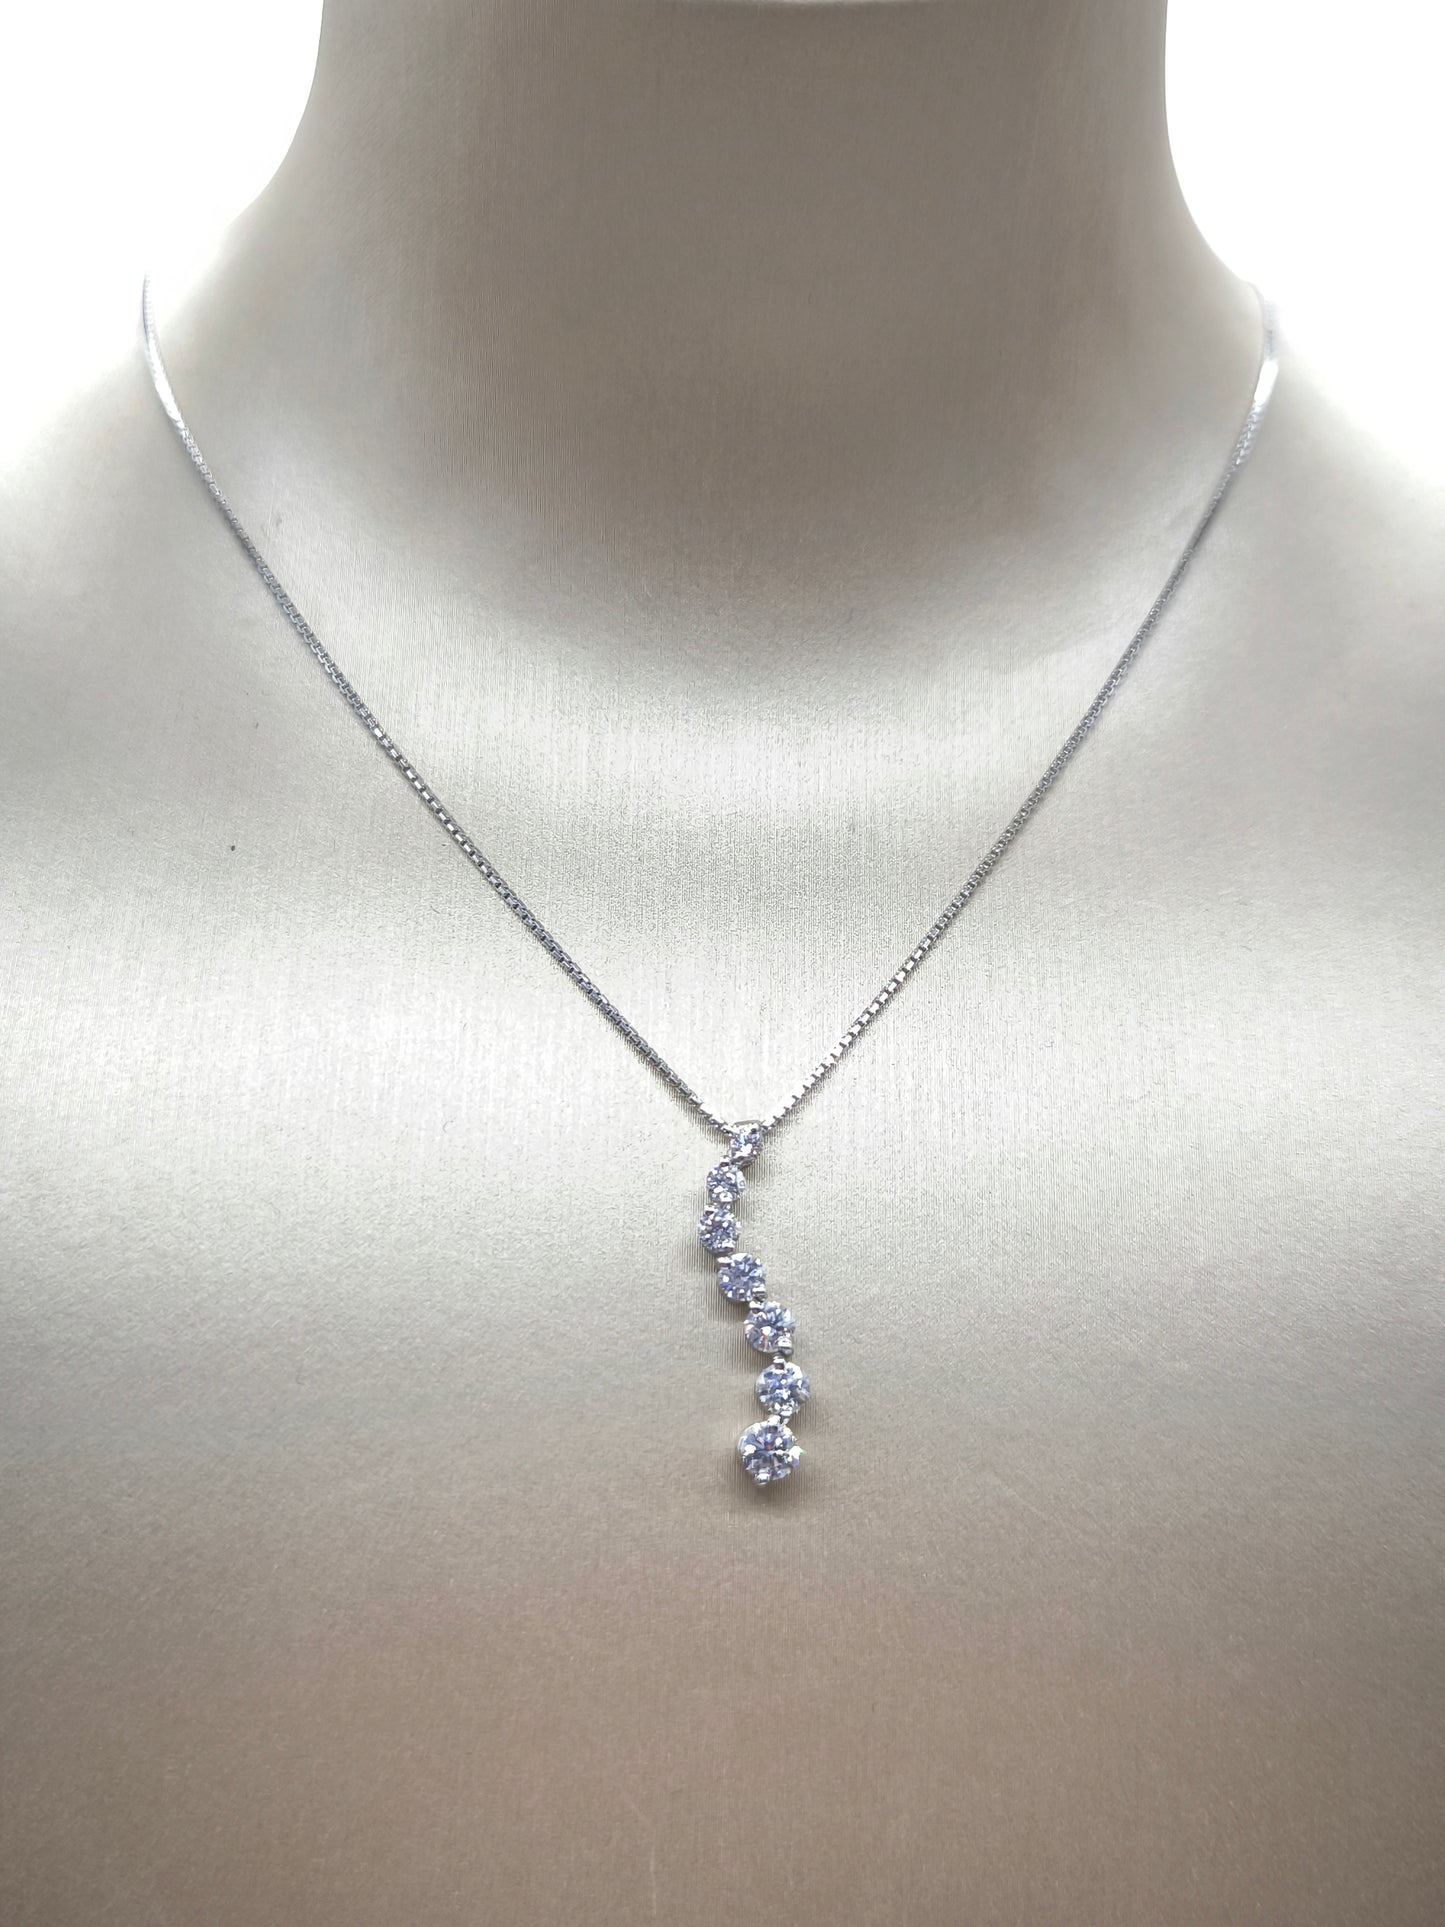 White gold necklace with scaled diamonds